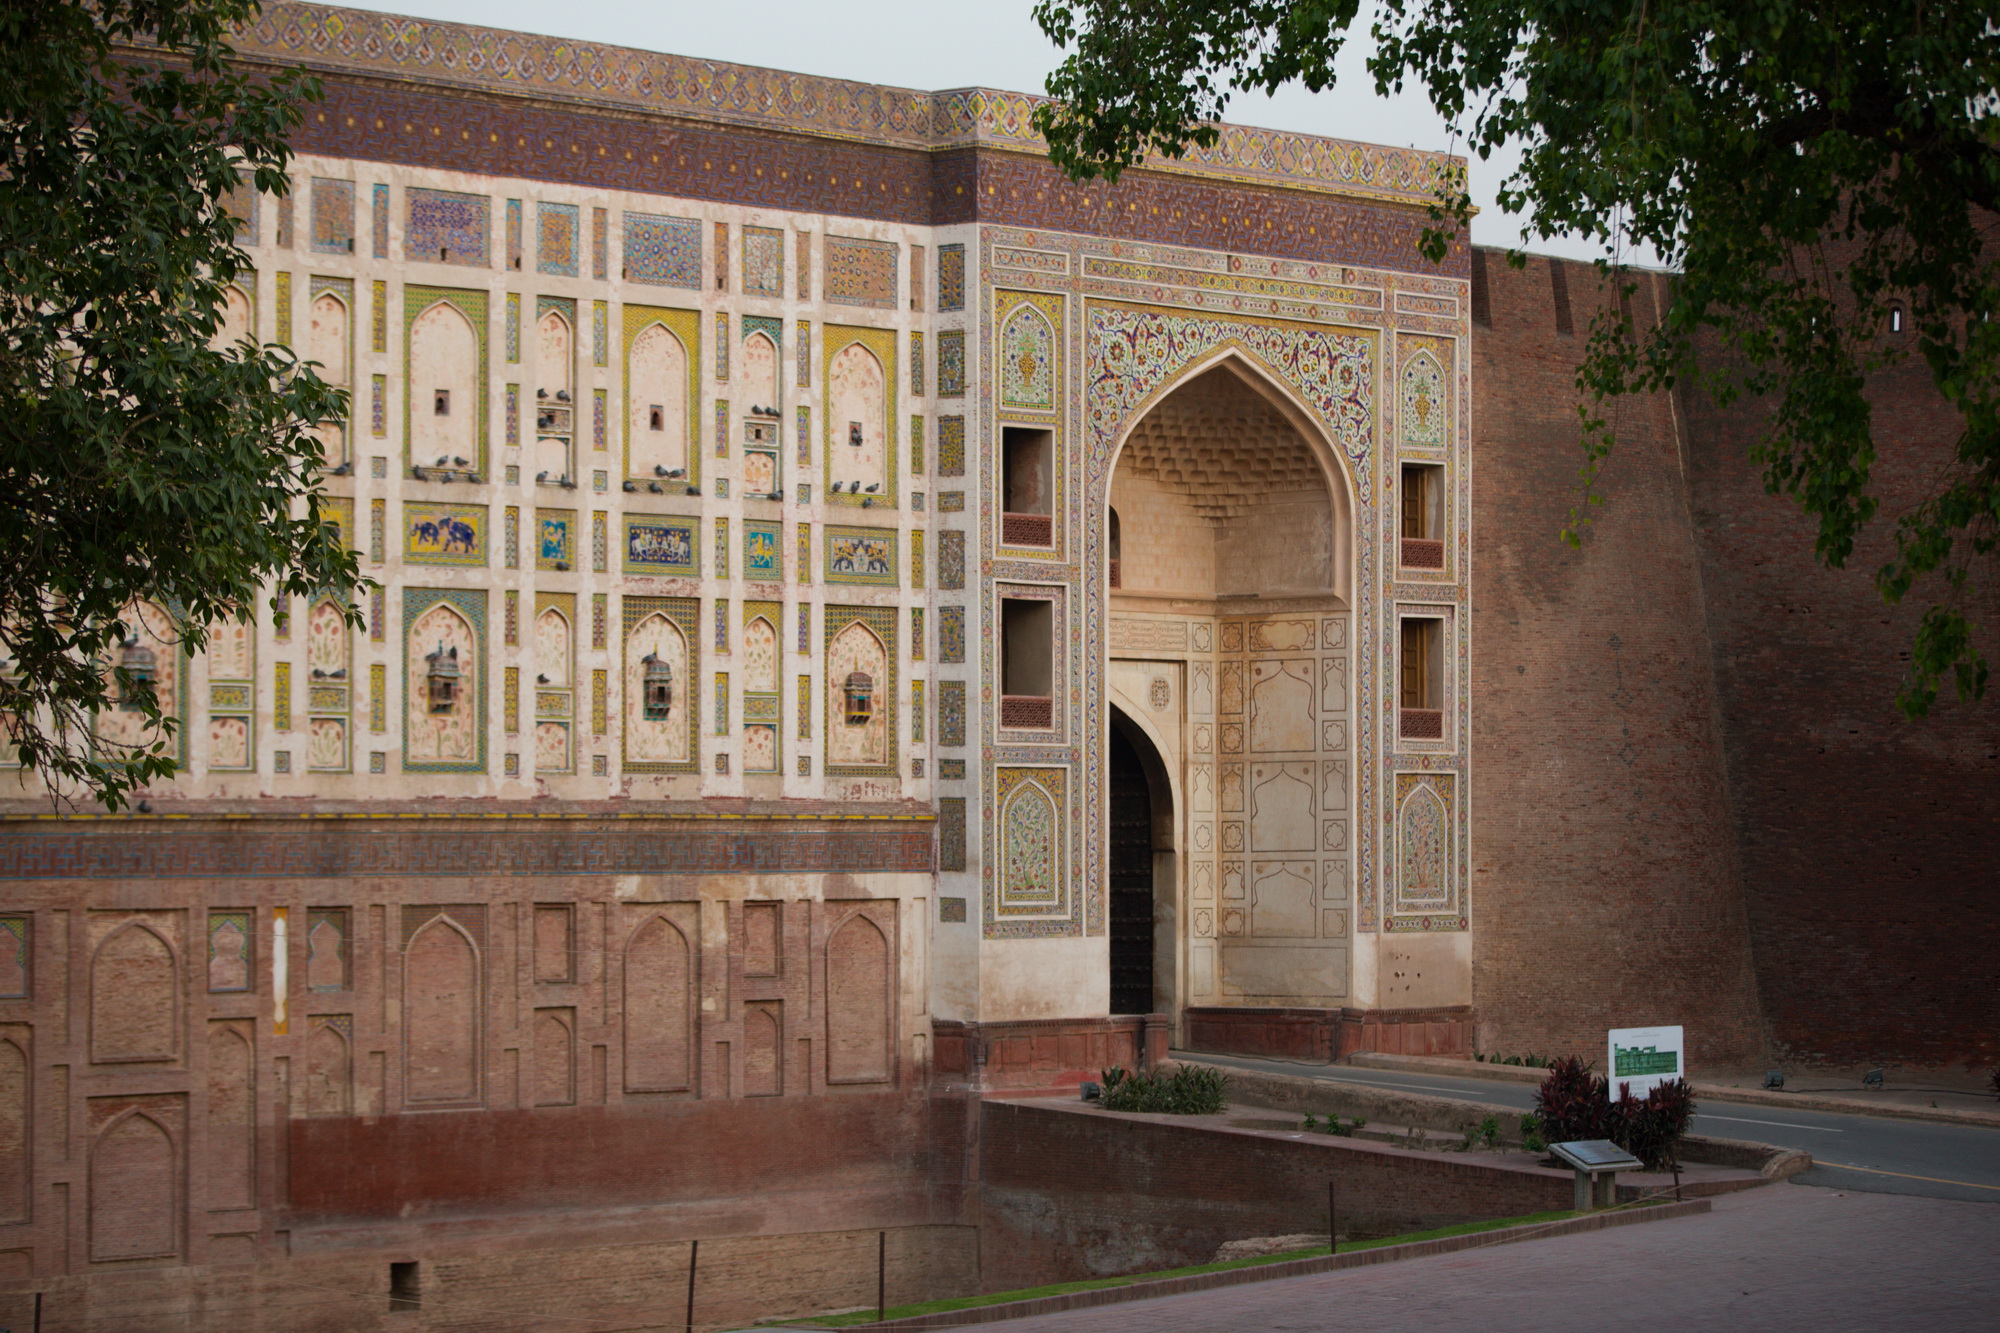 The Shah Burj Gate, along the Picture Wall and the principal entrance to the Lahore Fort Complex, after restoration